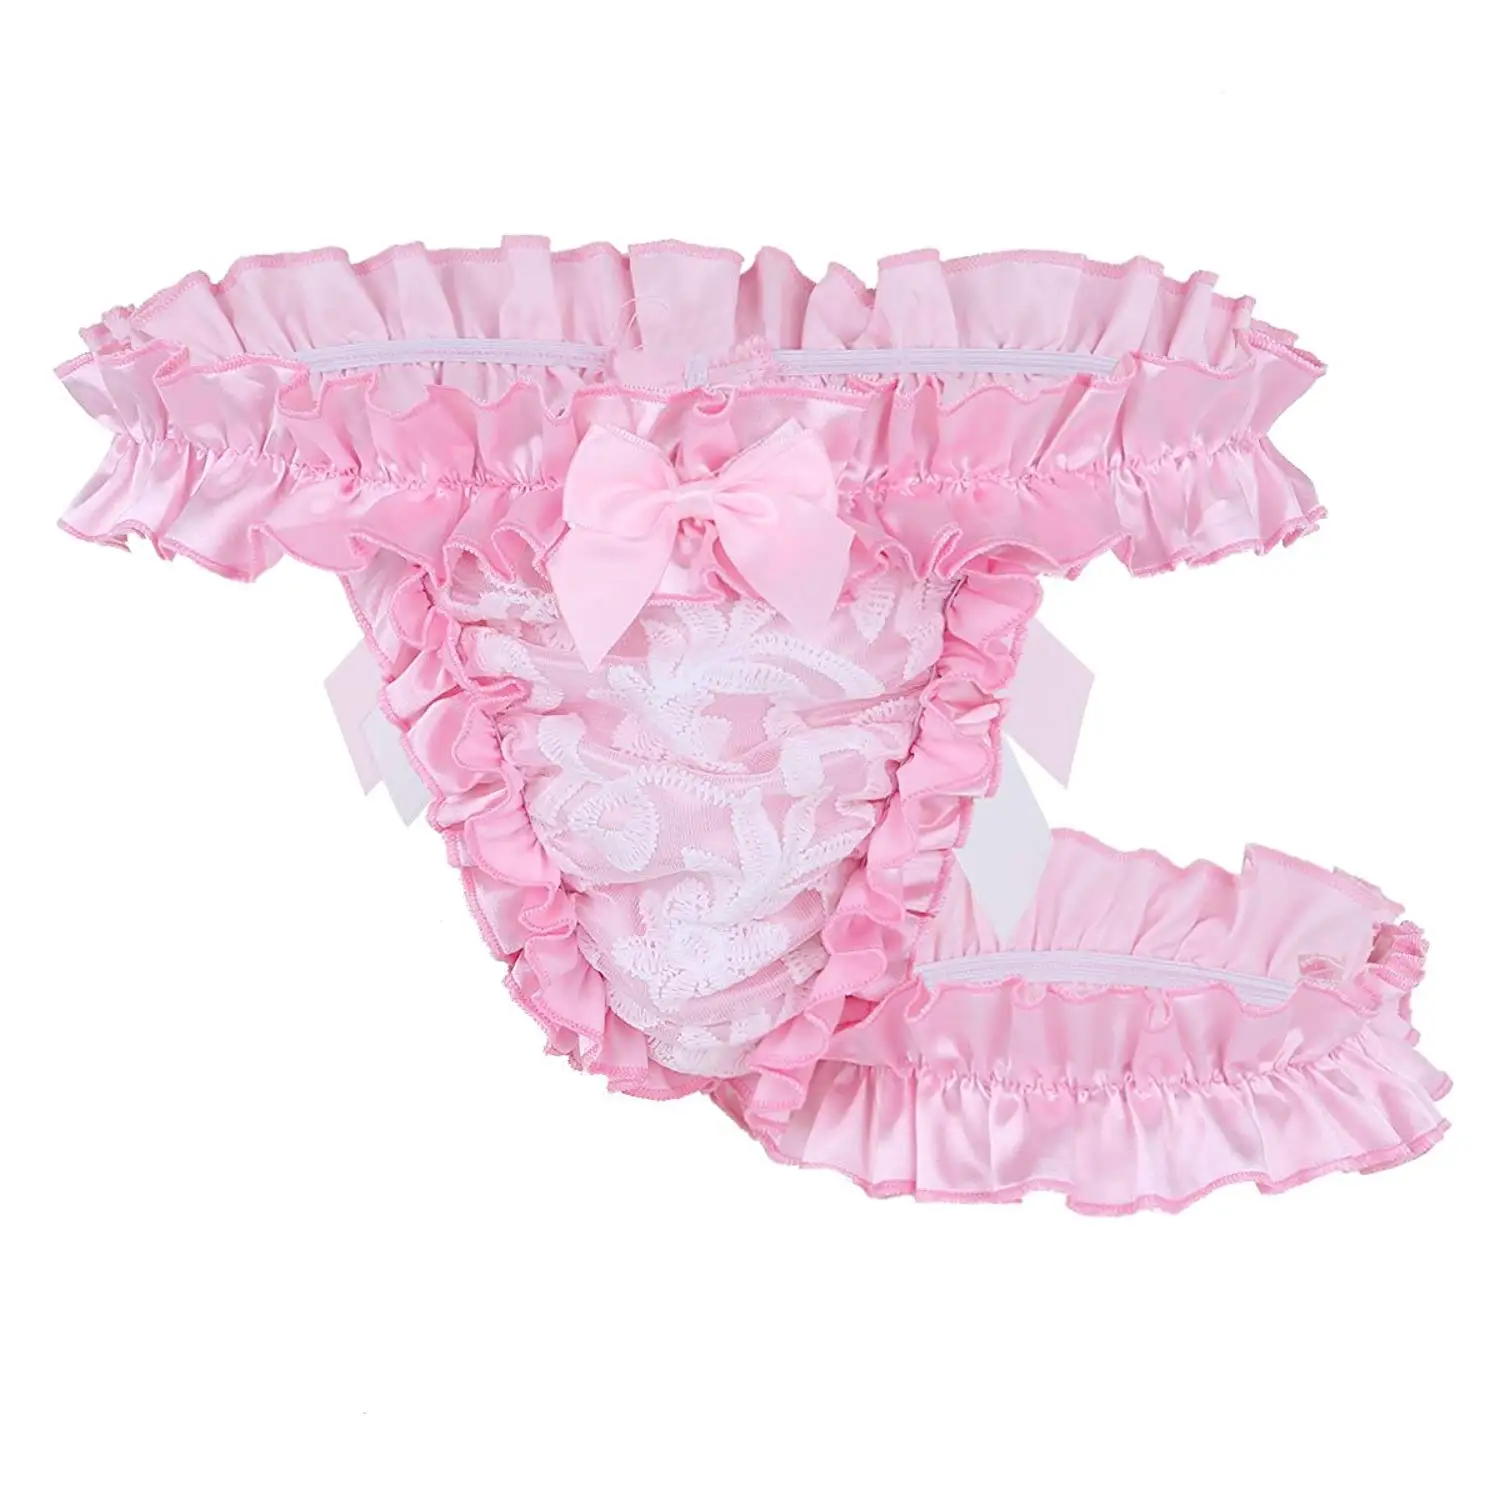 Cheap Frilly Knickers Men Find Frilly Knickers Men Deals On Line At